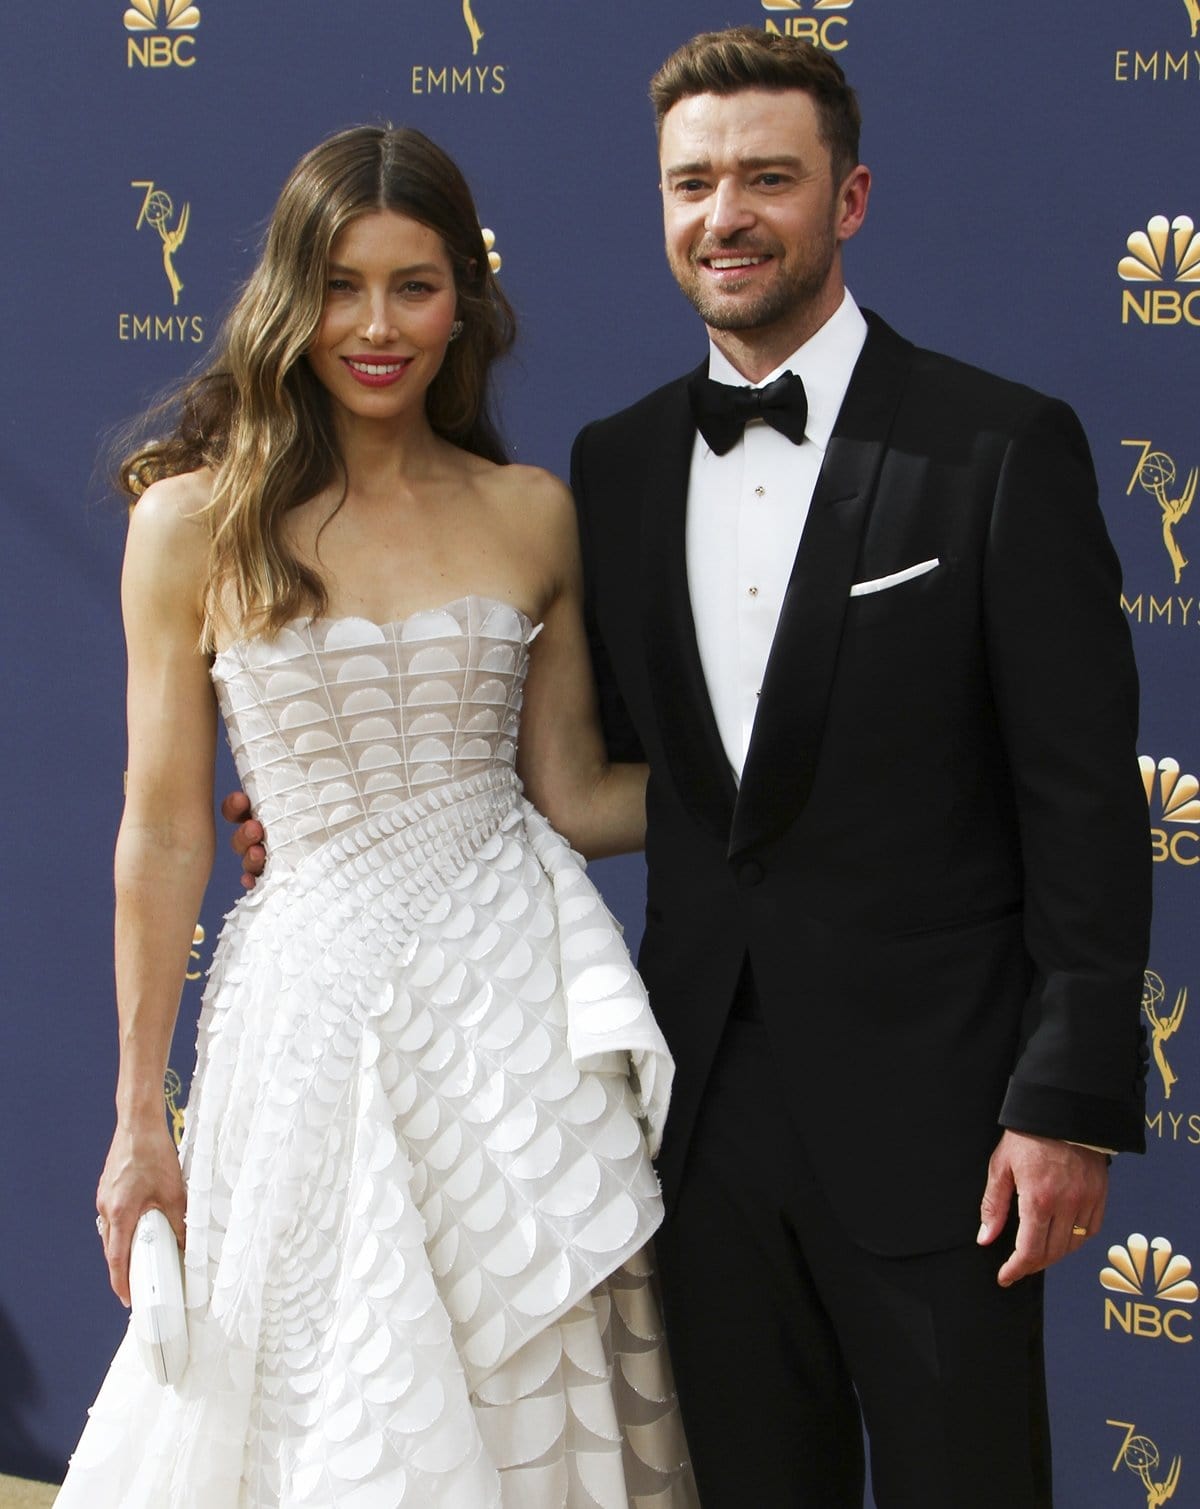 Jessica Biel and Justin Timberlake first met at a birthday party in 2007